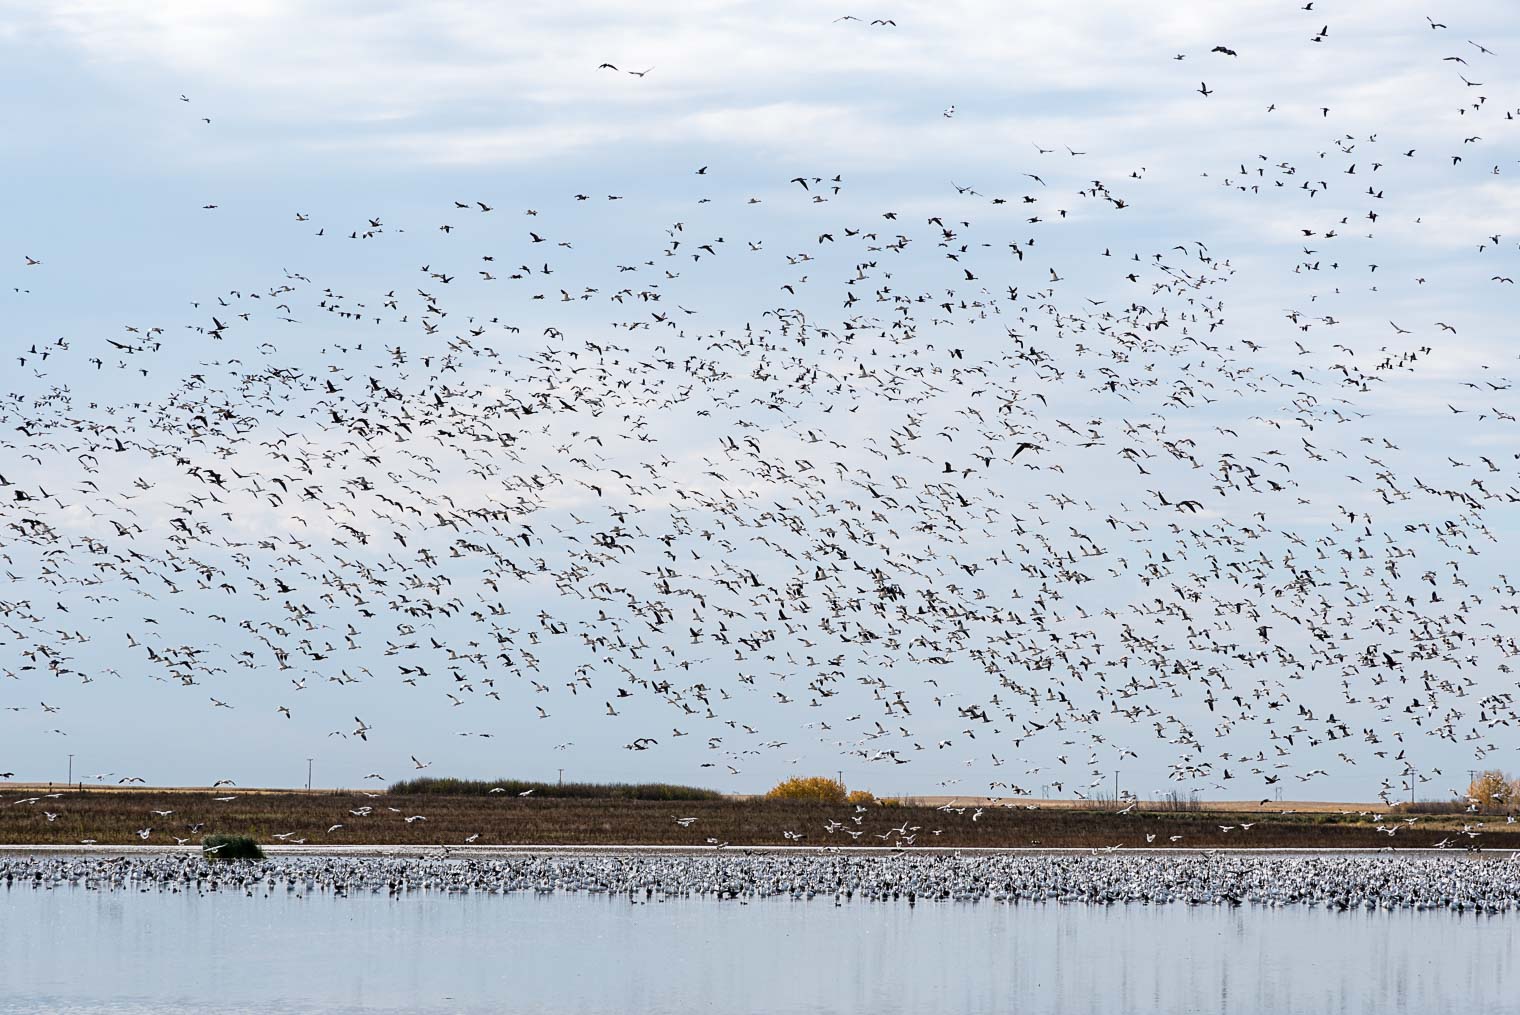 Snow Geese migration, Keeping With the Times, Barb Brookbank